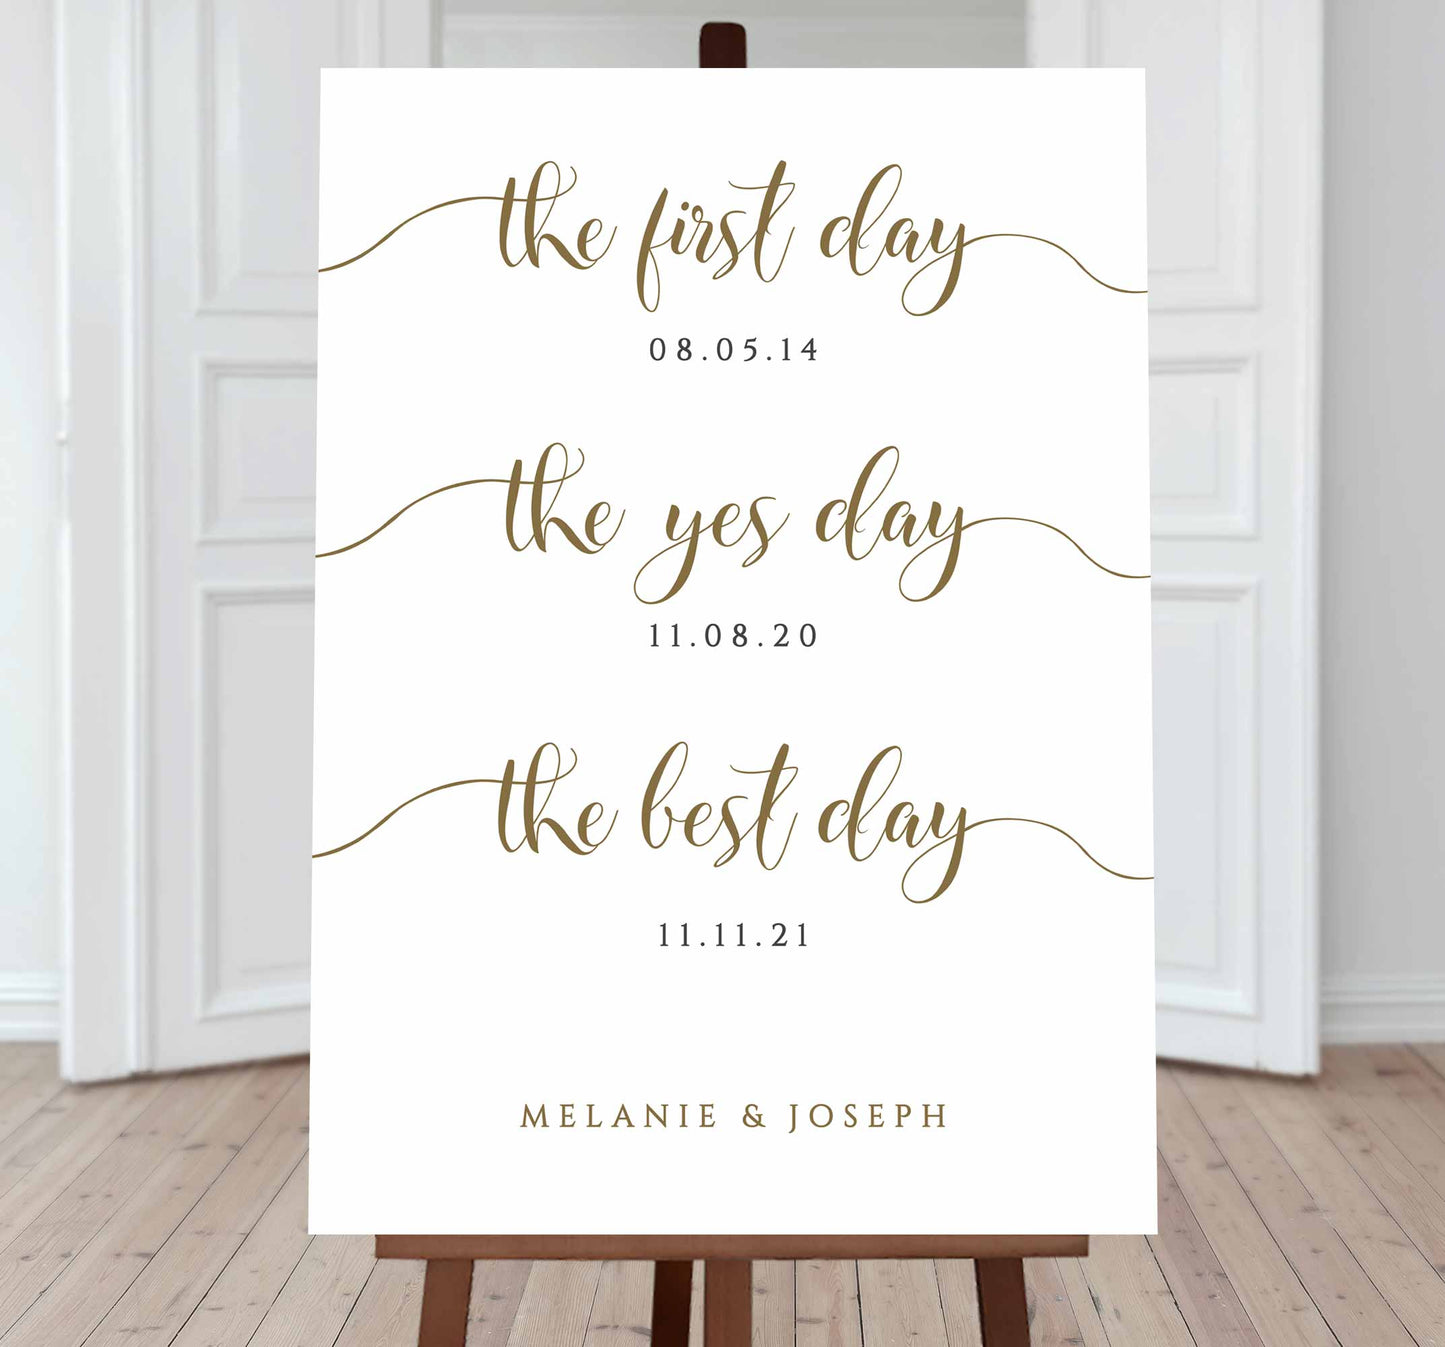 our journey so far editable wedding dates sign in gold